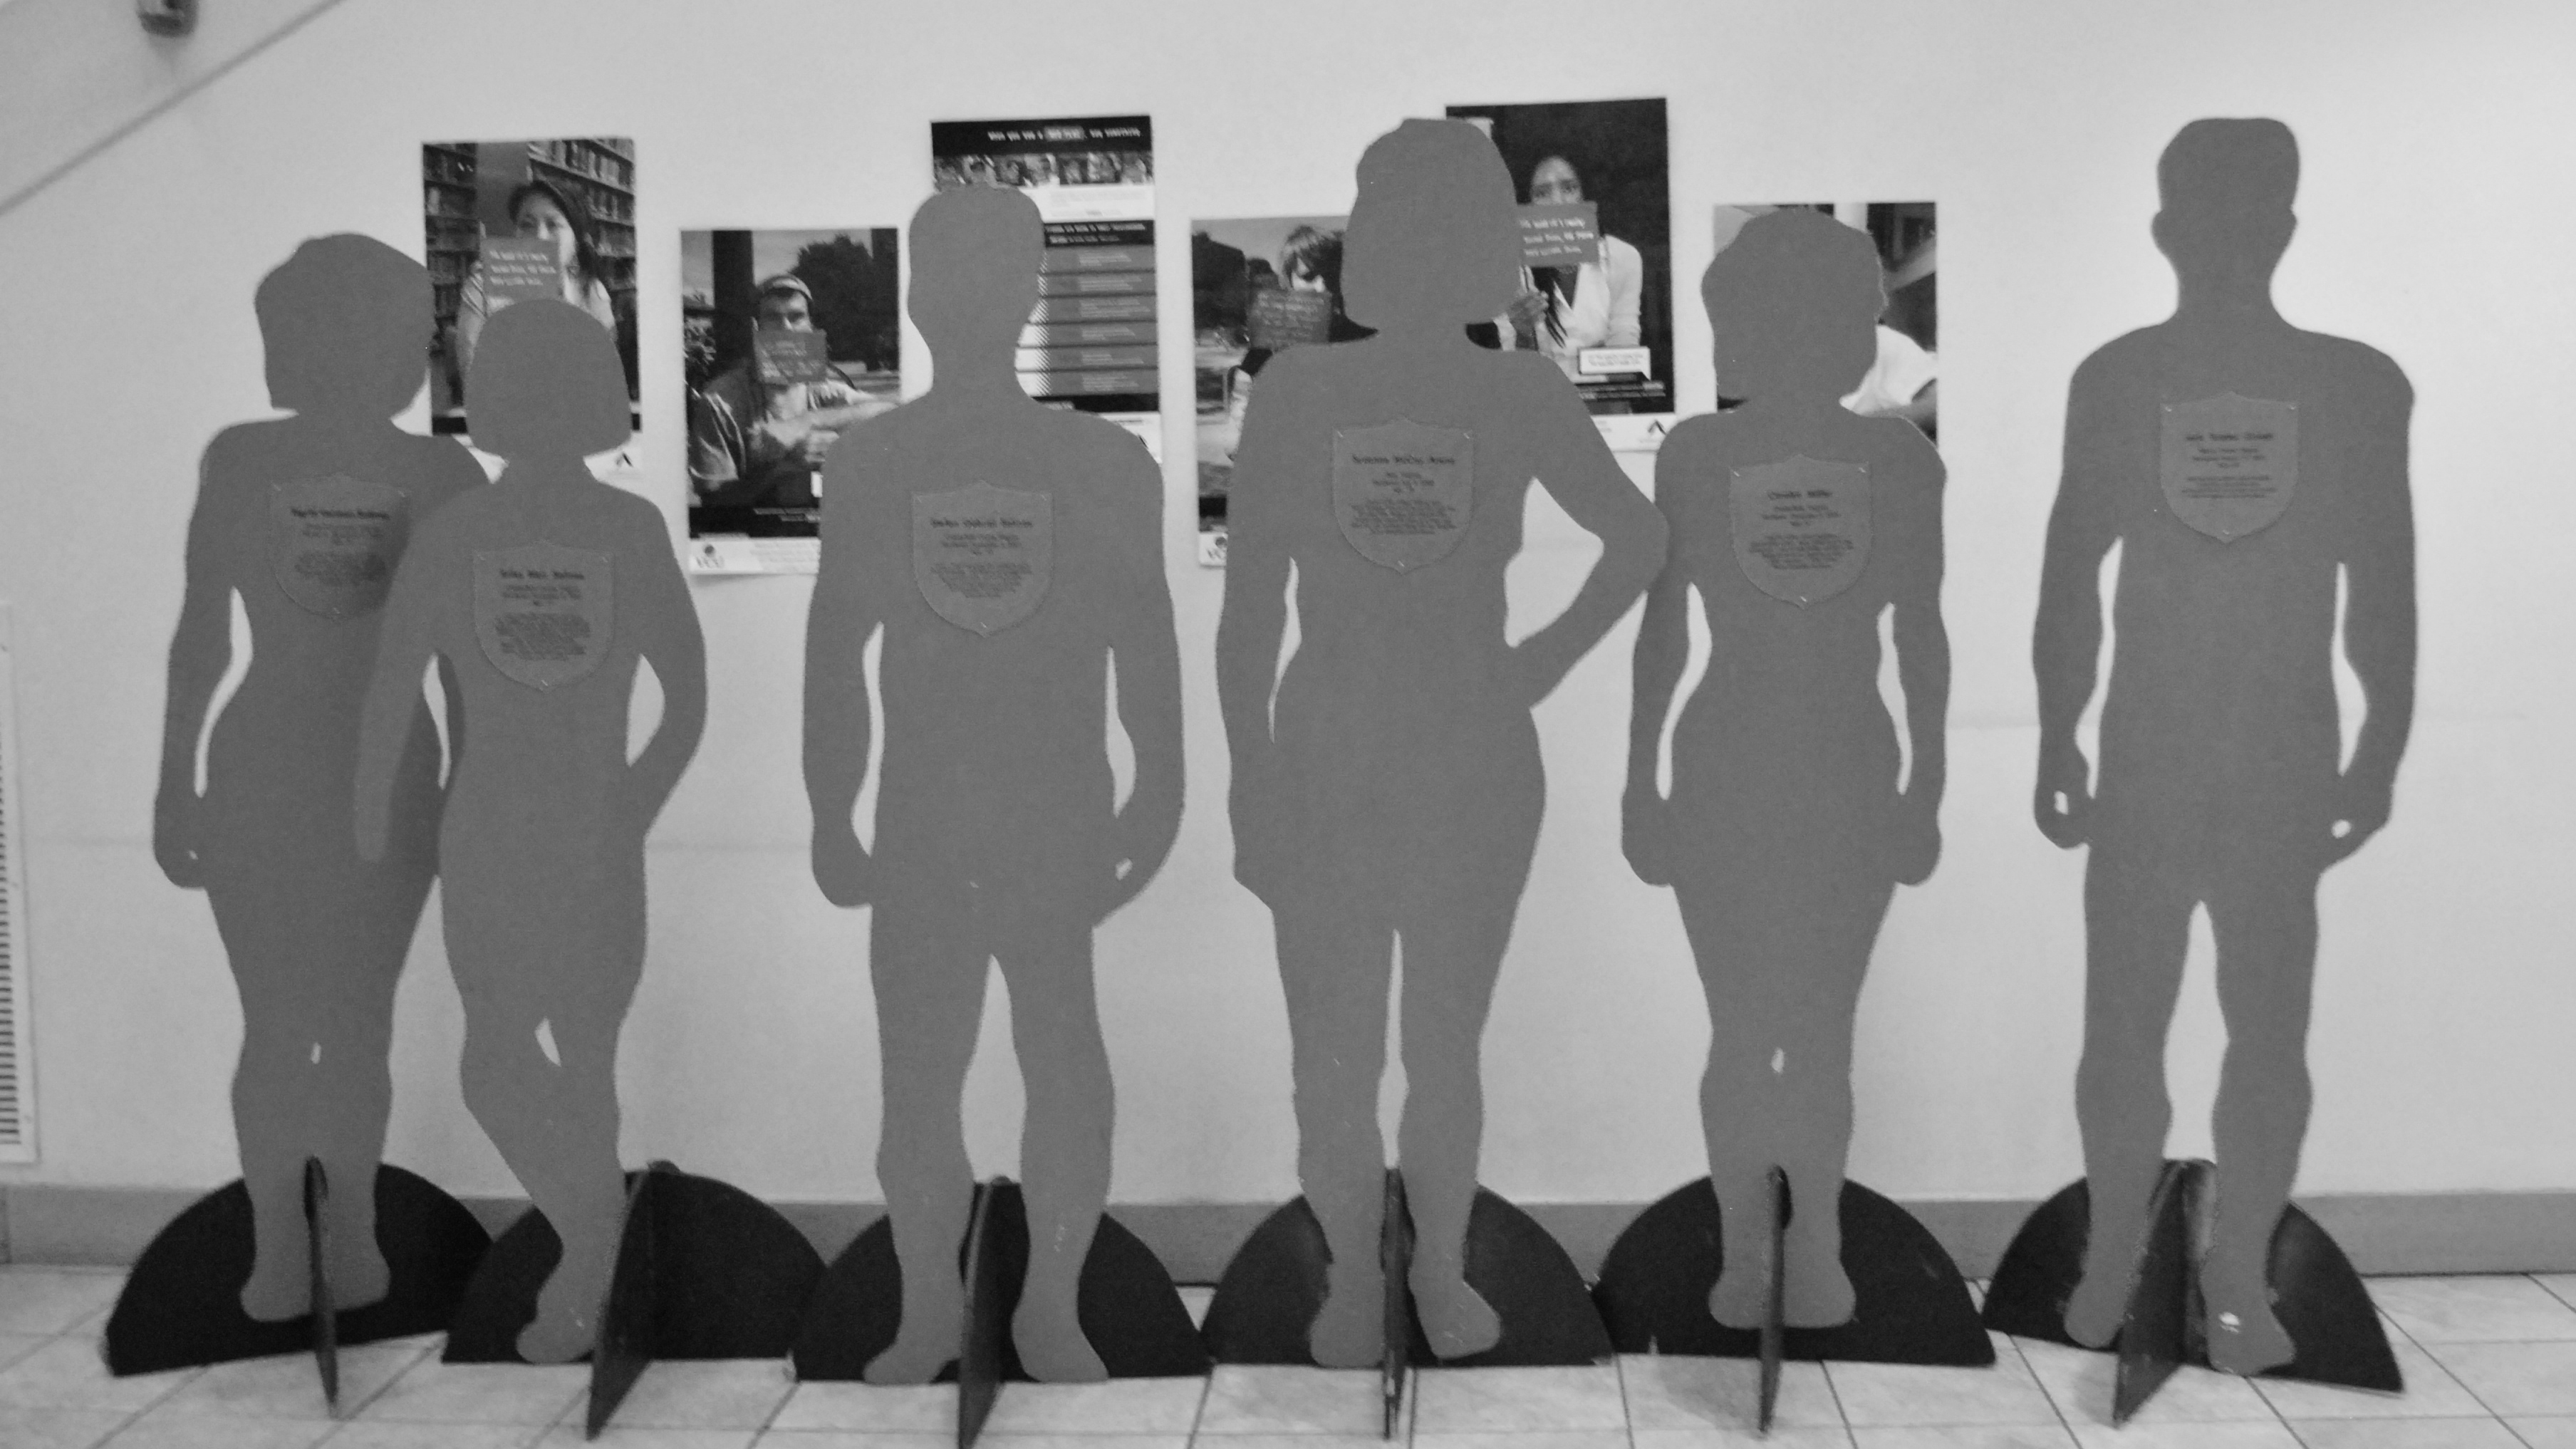 The VCU Silent Witness Exhibit, open October 6-12, is designed to raise awareness of the issue of domestic violence and encourage action to create change.